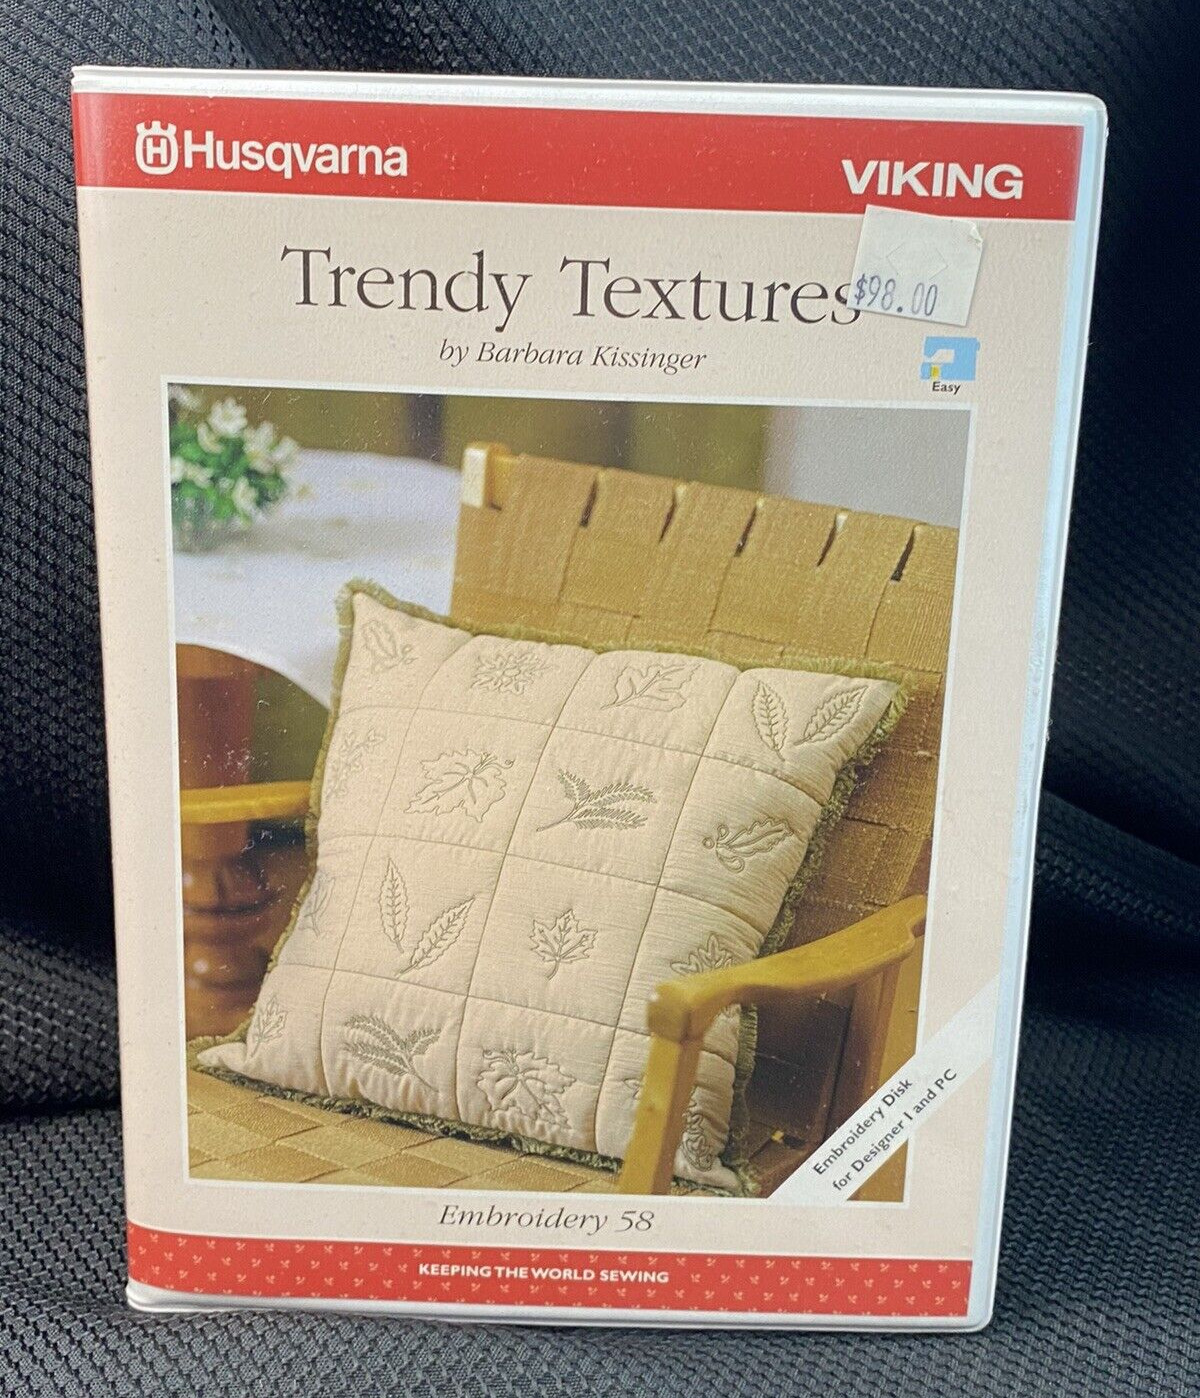 Husqvarna Viking Embroidery Disk #58 Trendy Textures 2 Disks Booklet 2002